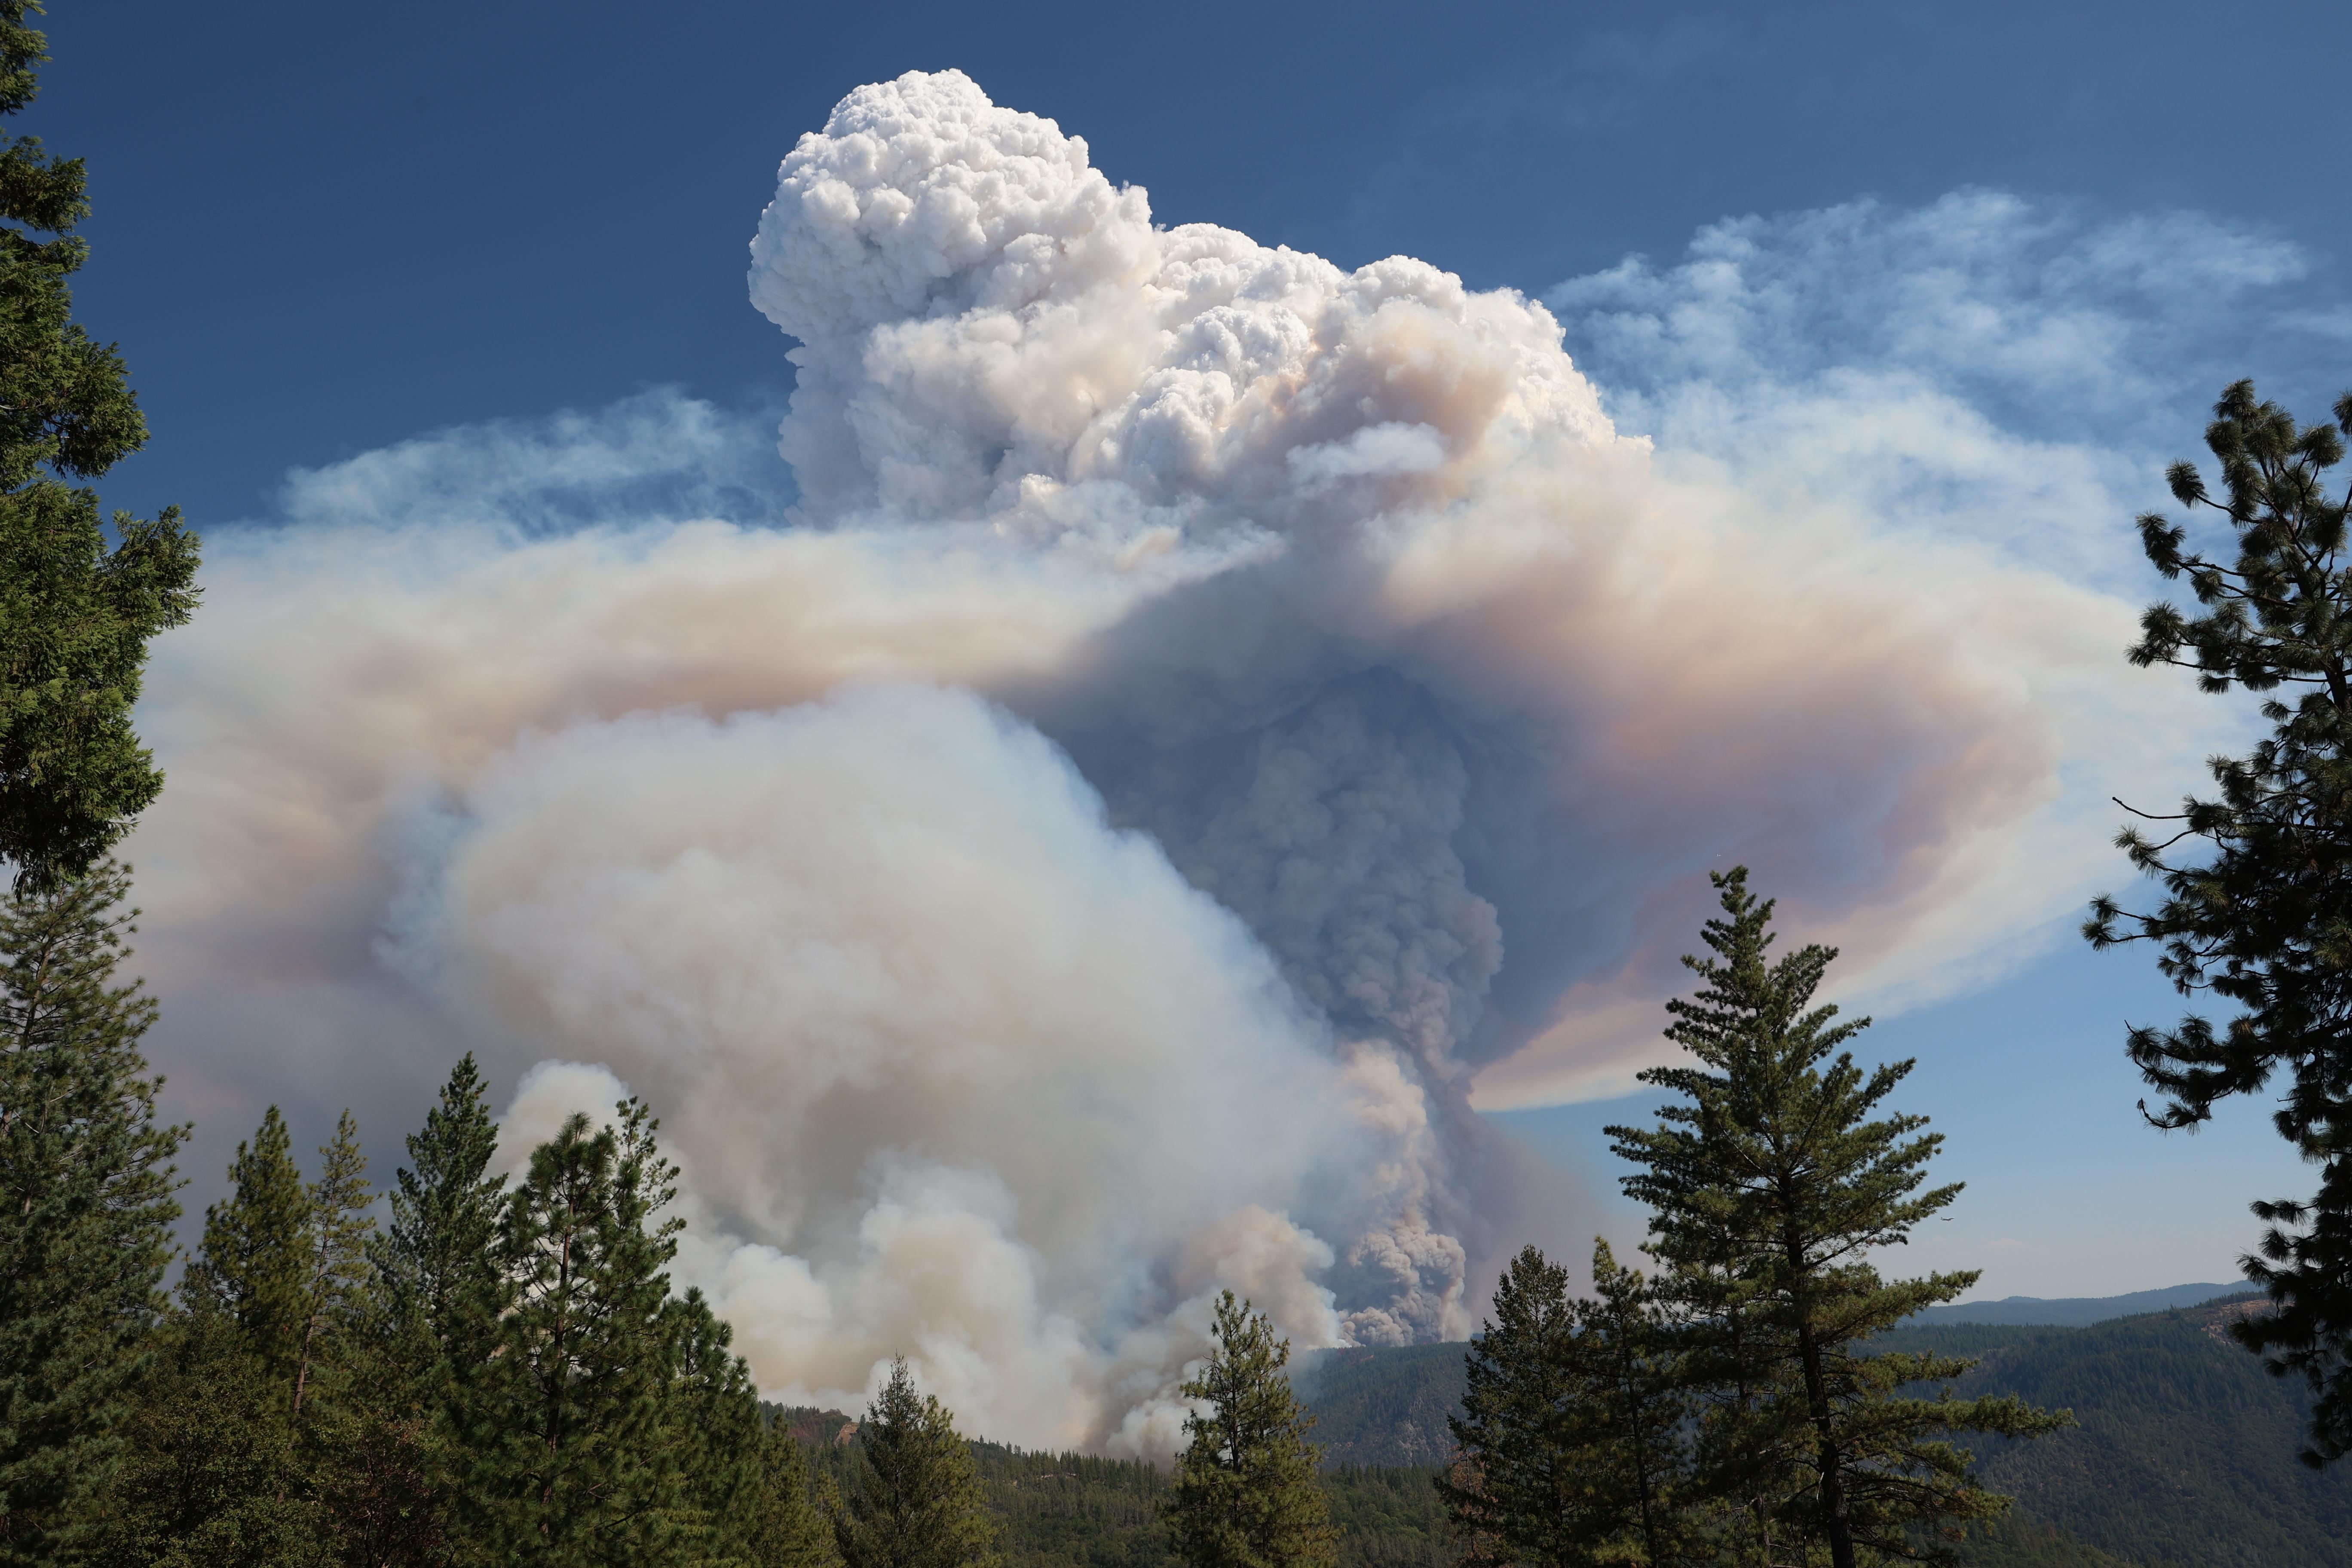 large column of smoke forms in the distance in mountainous, forested terrain